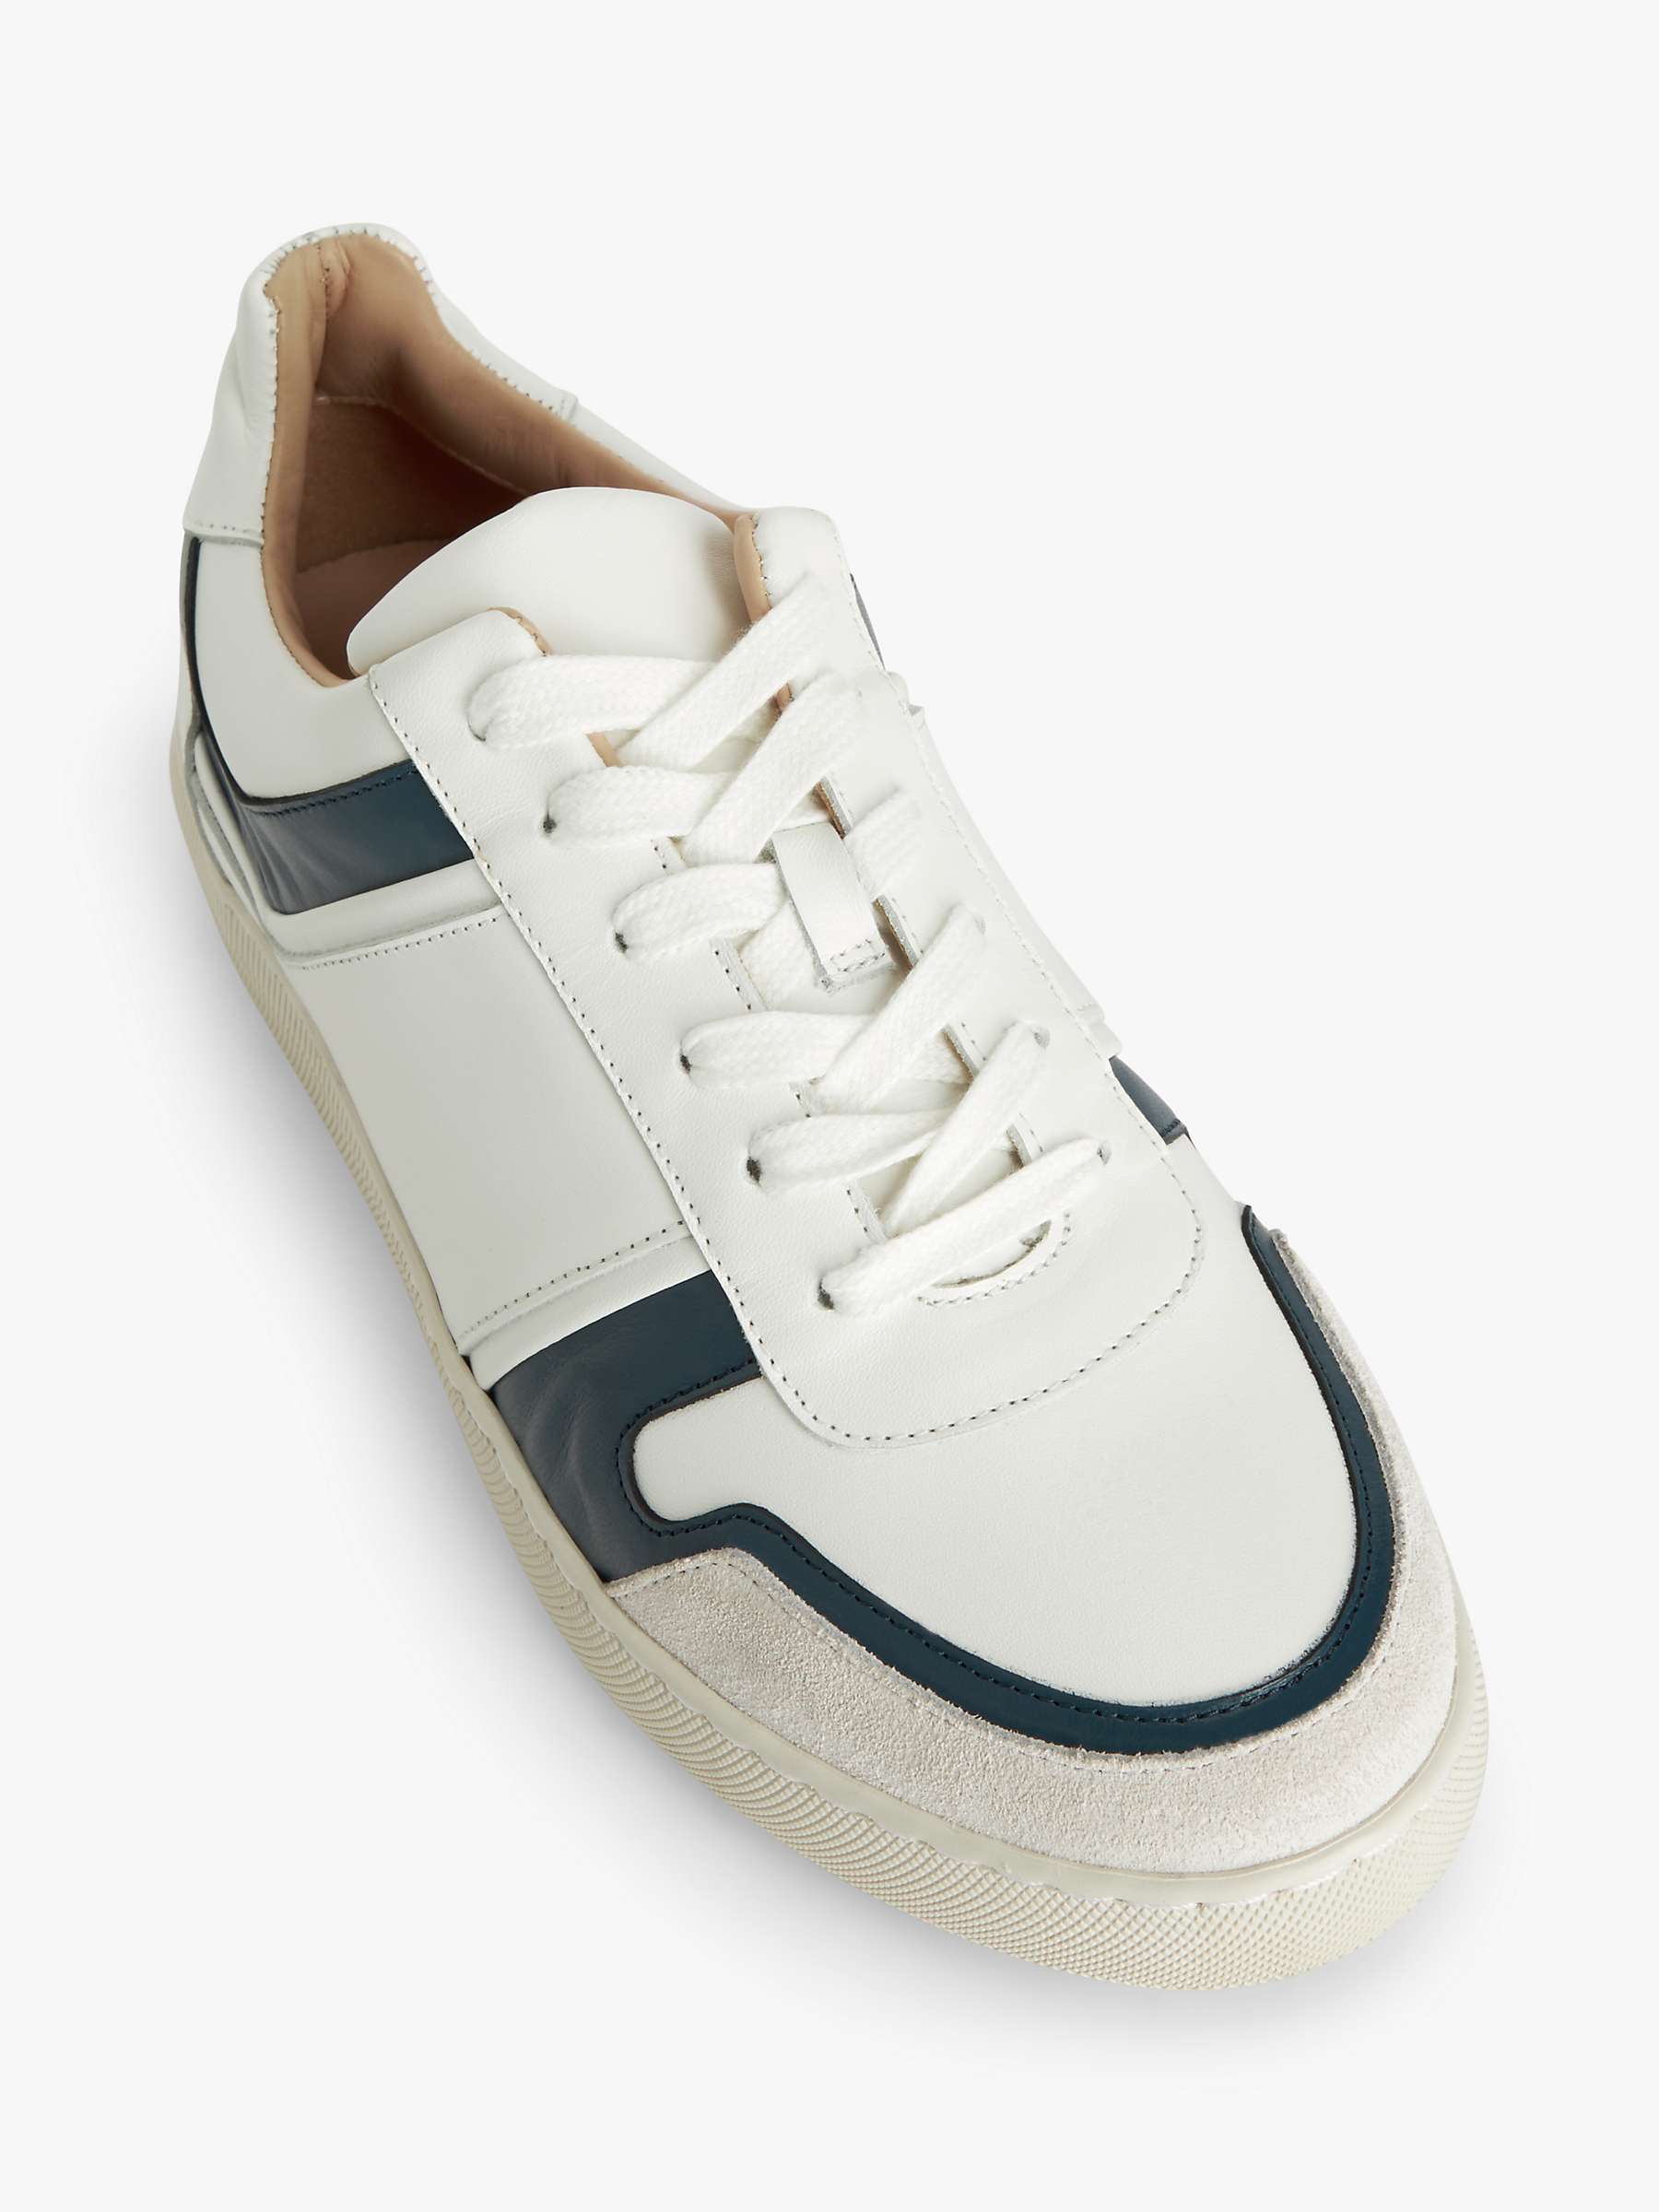 Buy John Lewis Flynne Leather Lace Up Cupsole Trainers, White/Teal Online at johnlewis.com